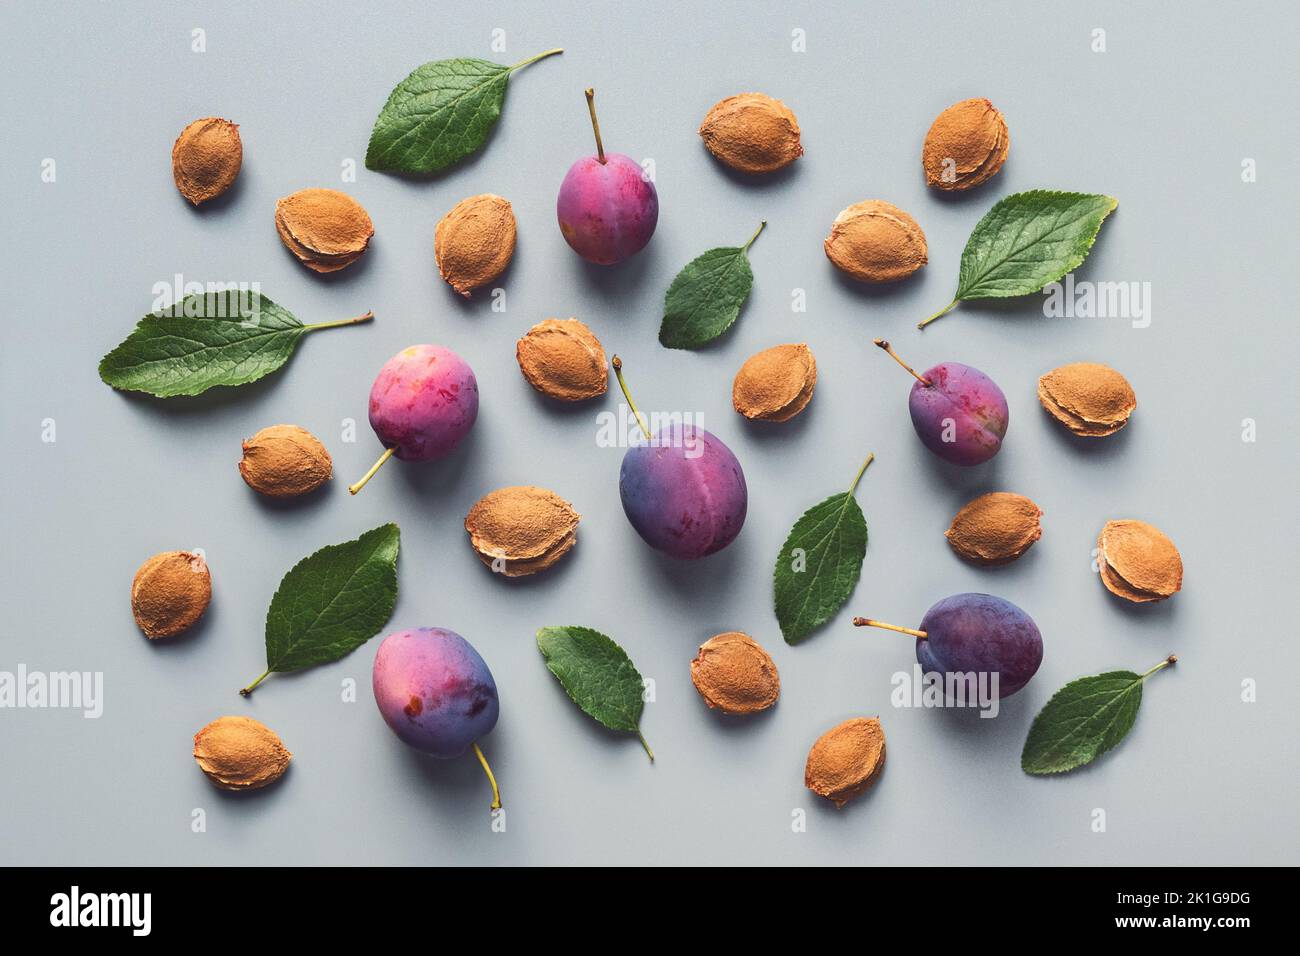 Plums seeds and leaves as fruit background pattern, autumn flat lay Stock Photo